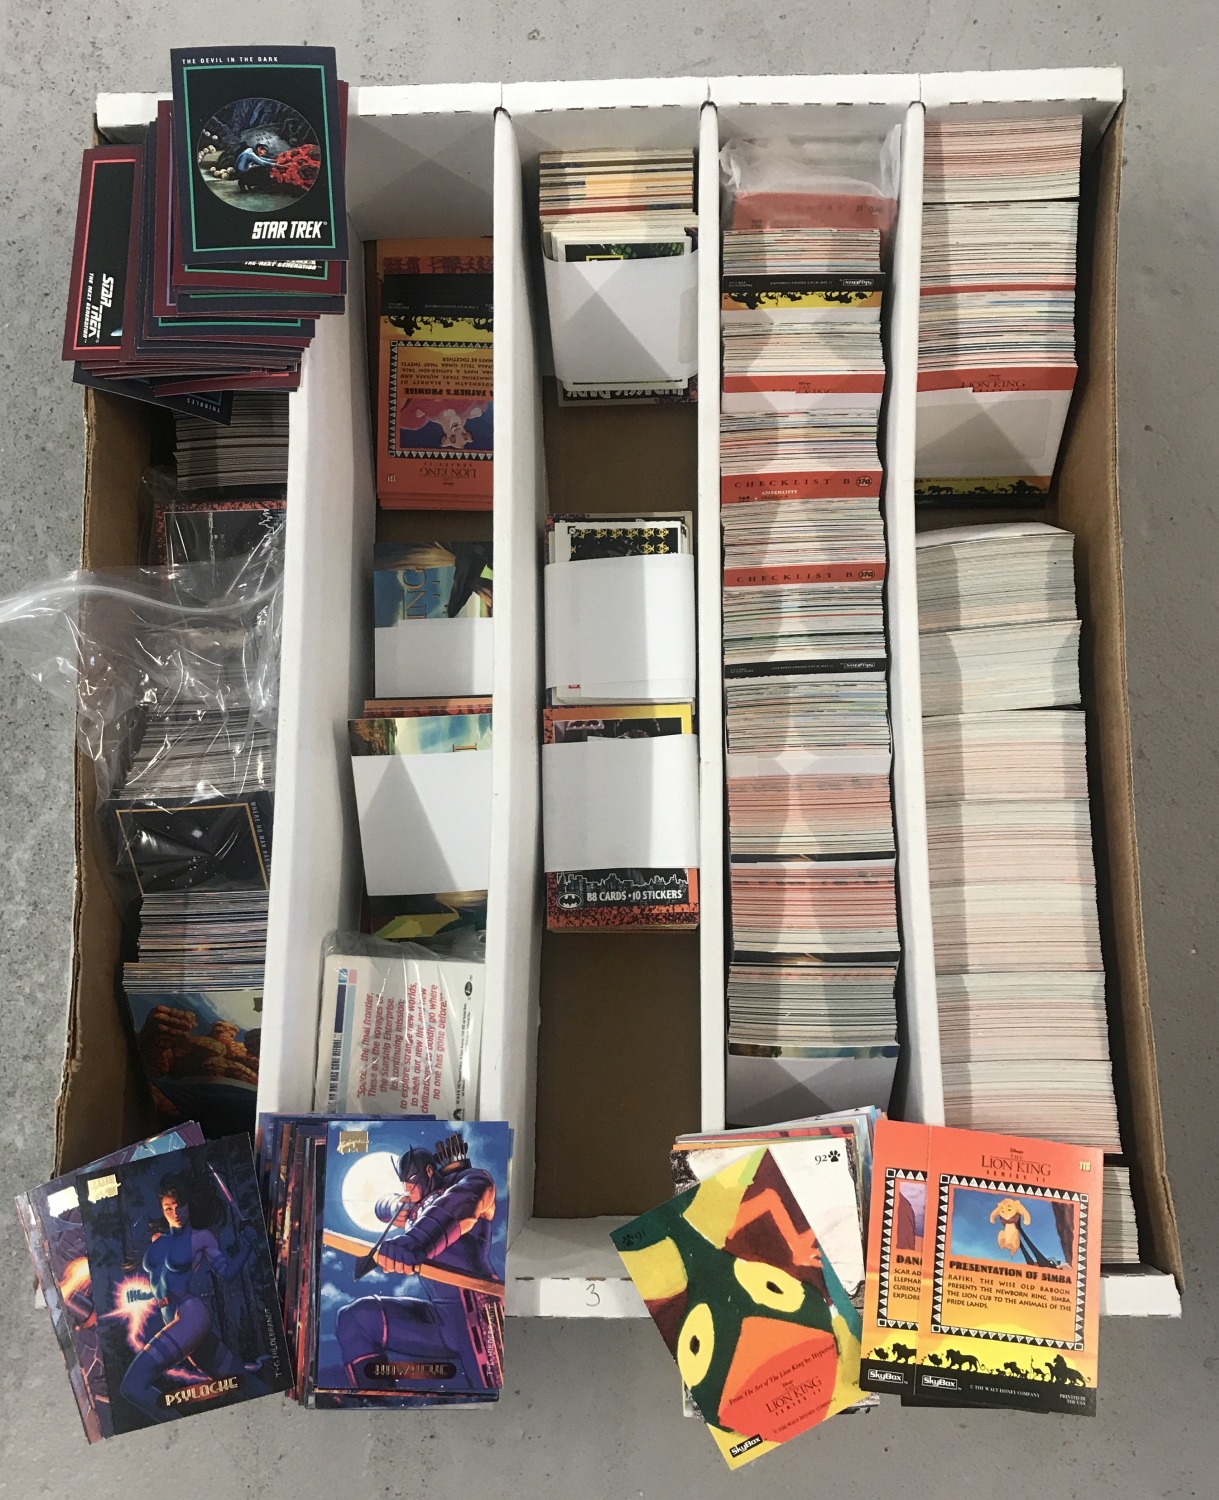 A quantity of assorted trading cards.